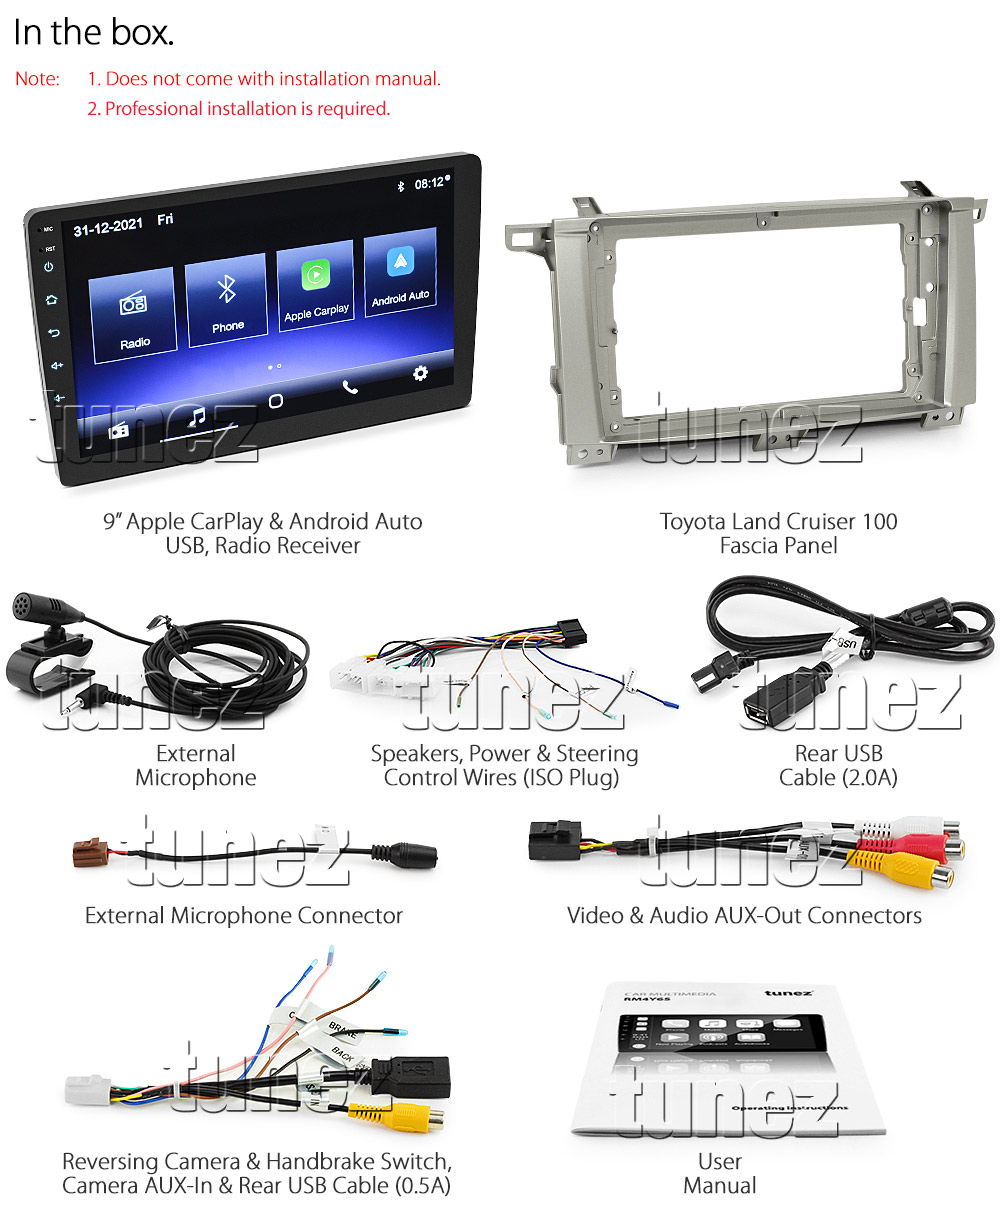 TLC13CP TLC13 Licensed Apple CarPlay Android Auto GPS GPS Super Large 9-inch Toyota Land Cruiser LandCruiser 100 Series J100 Year 2003 2004 2005 2006 2007 GXL Sahara Kakadu Super Large 9-inch Touch Screen IPS Capacitive Universal Double DIN Latest Australia UK European USA Original Car USB 2.0A Charge player radio stereo head unit Aftermarket External and Internal Microphone Bluetooth Europe Sat Nav Navi Plug and Play ISO Plug Wiring Harness Matching Fascia Kit Facia Free Reversing Camera Album Art ID3 Tag RMVB MP3 MP4 AVI MKV Full High Definition FHD AirPlay Air Play MirrorLink Mirror Link Connects2 CTSTY008.2 CTSTY00C CTSTY00CAMP CTSTY013.2